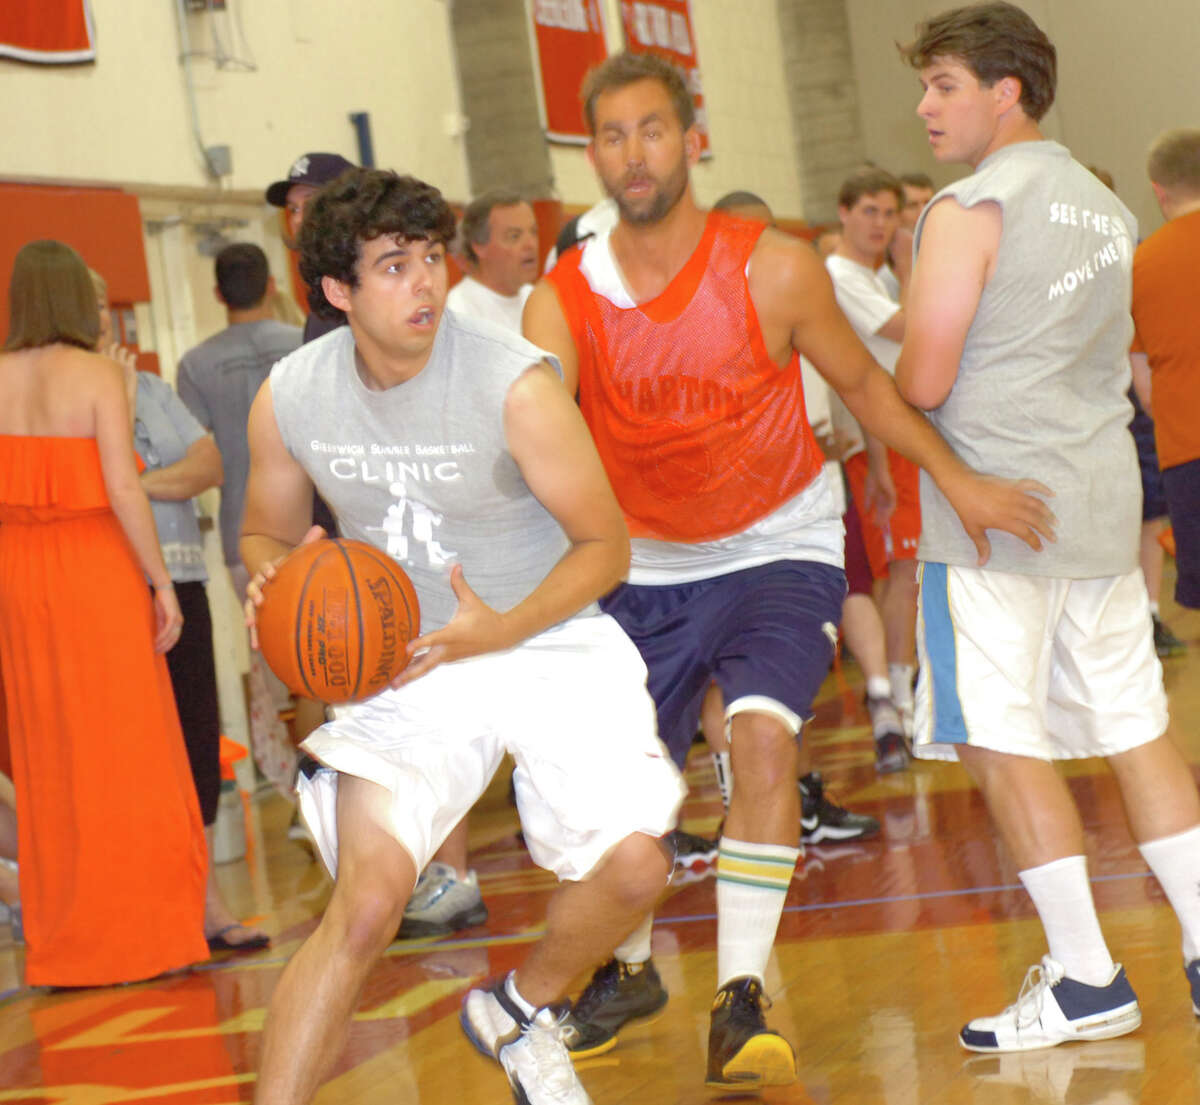 From left: Andrew Gruseke, Arie Barendrecht and Matt Gruseke at the 3-on-3 tournament at the first Coach Bob Classic, to honor the legacy of Bob Haugen, the founder and former president of the Greenwich Basketball Association at Greenwich High School Sunday, June 3, 2012.